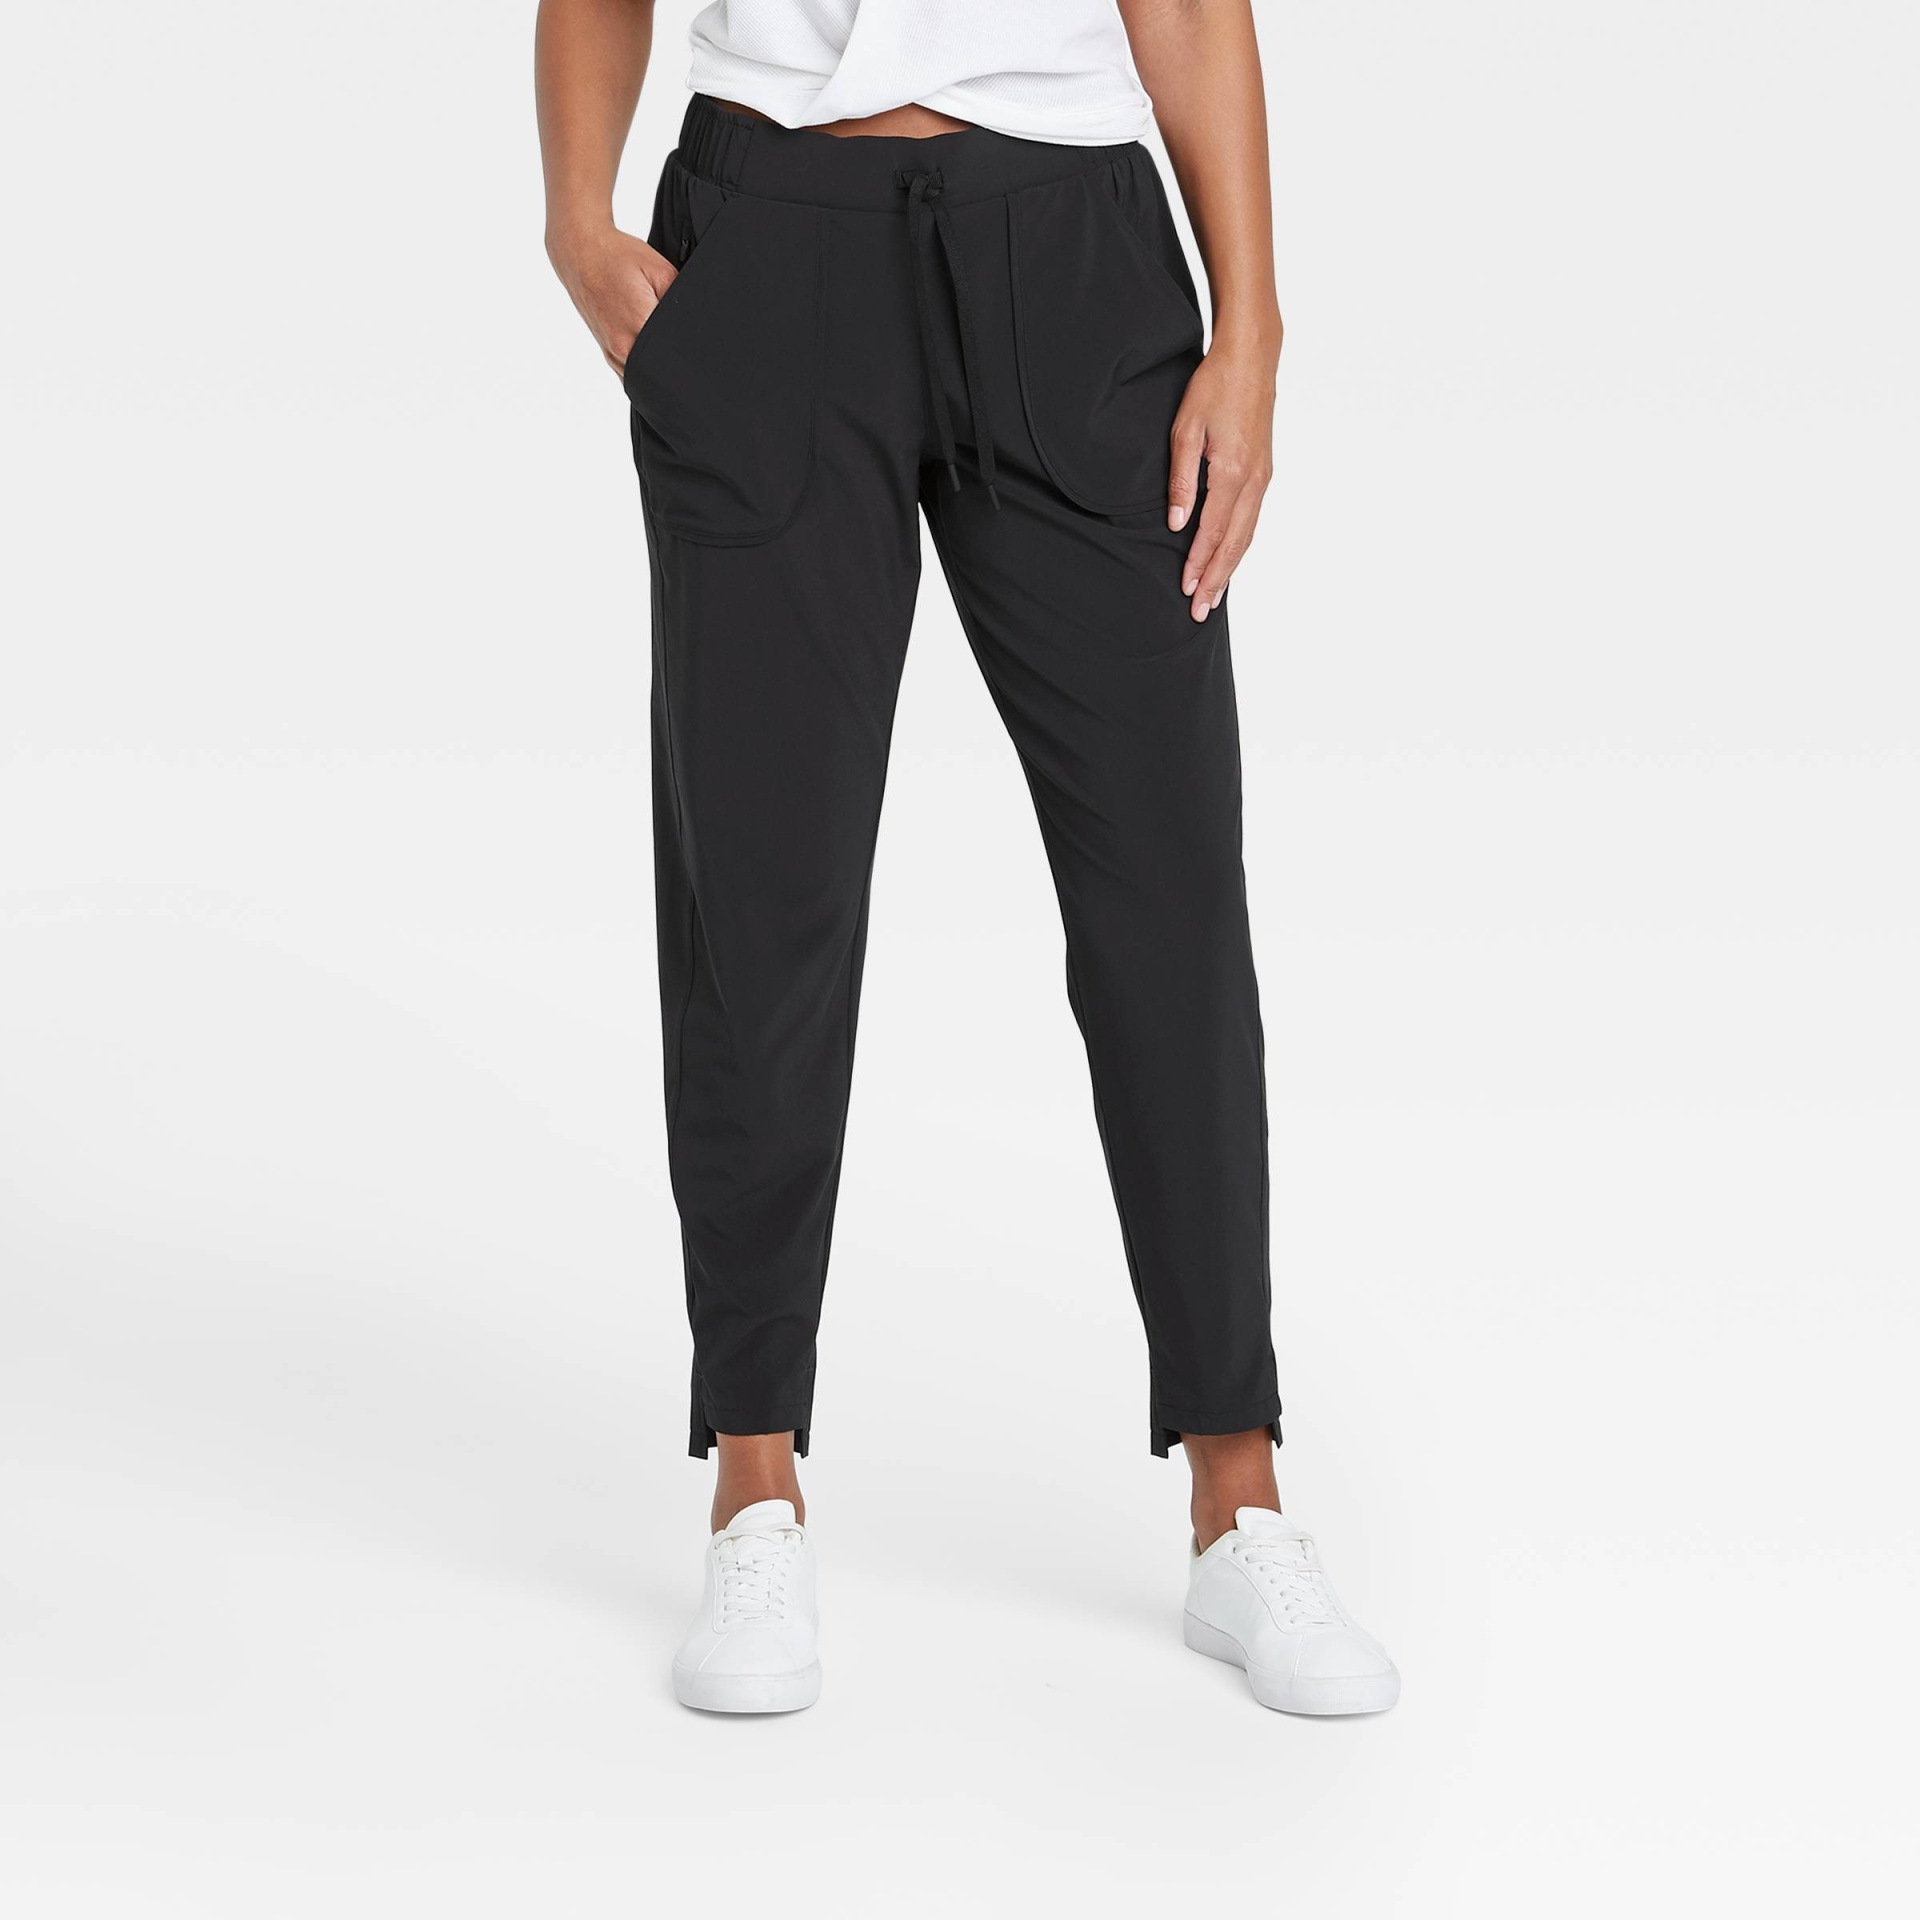 Women's Activewear Woven Track Pants - All In Motion Black XL